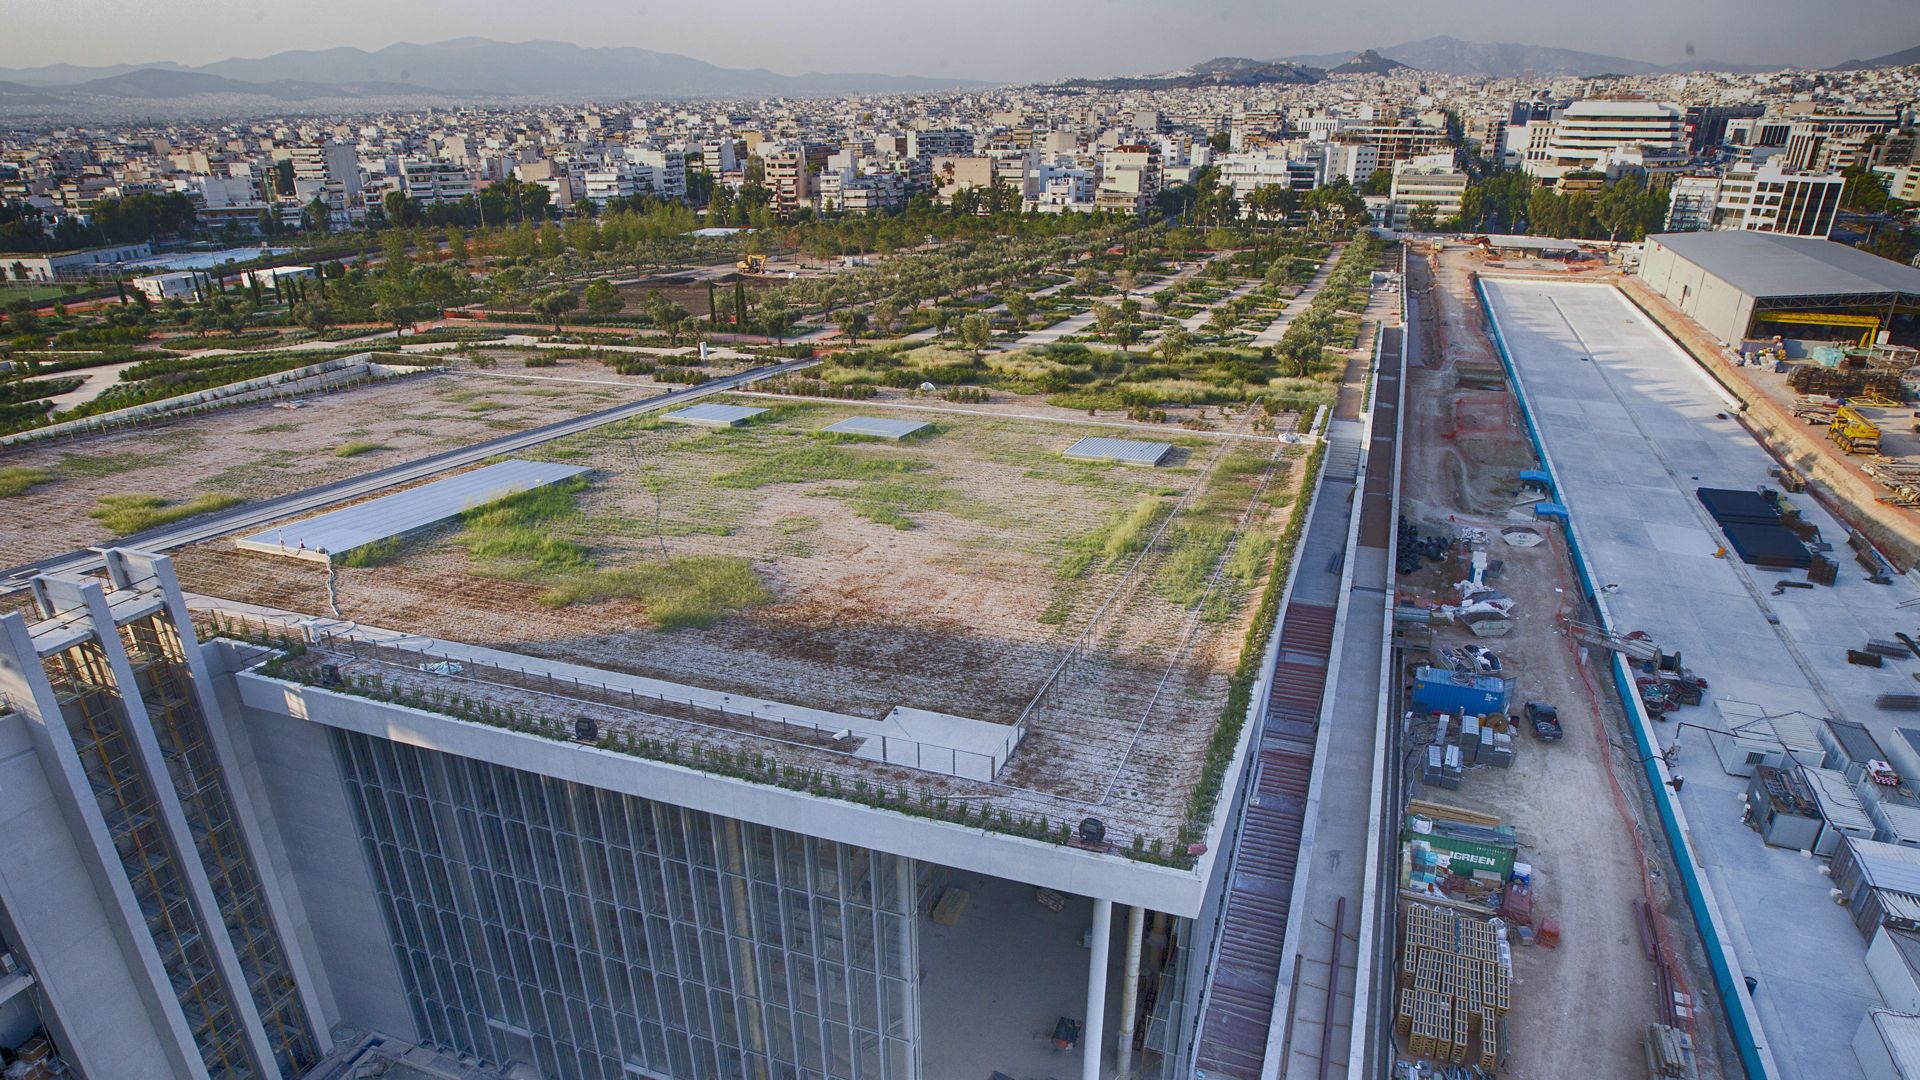 Construction Site of the Stavros Niarchos Cultural Center in Greece